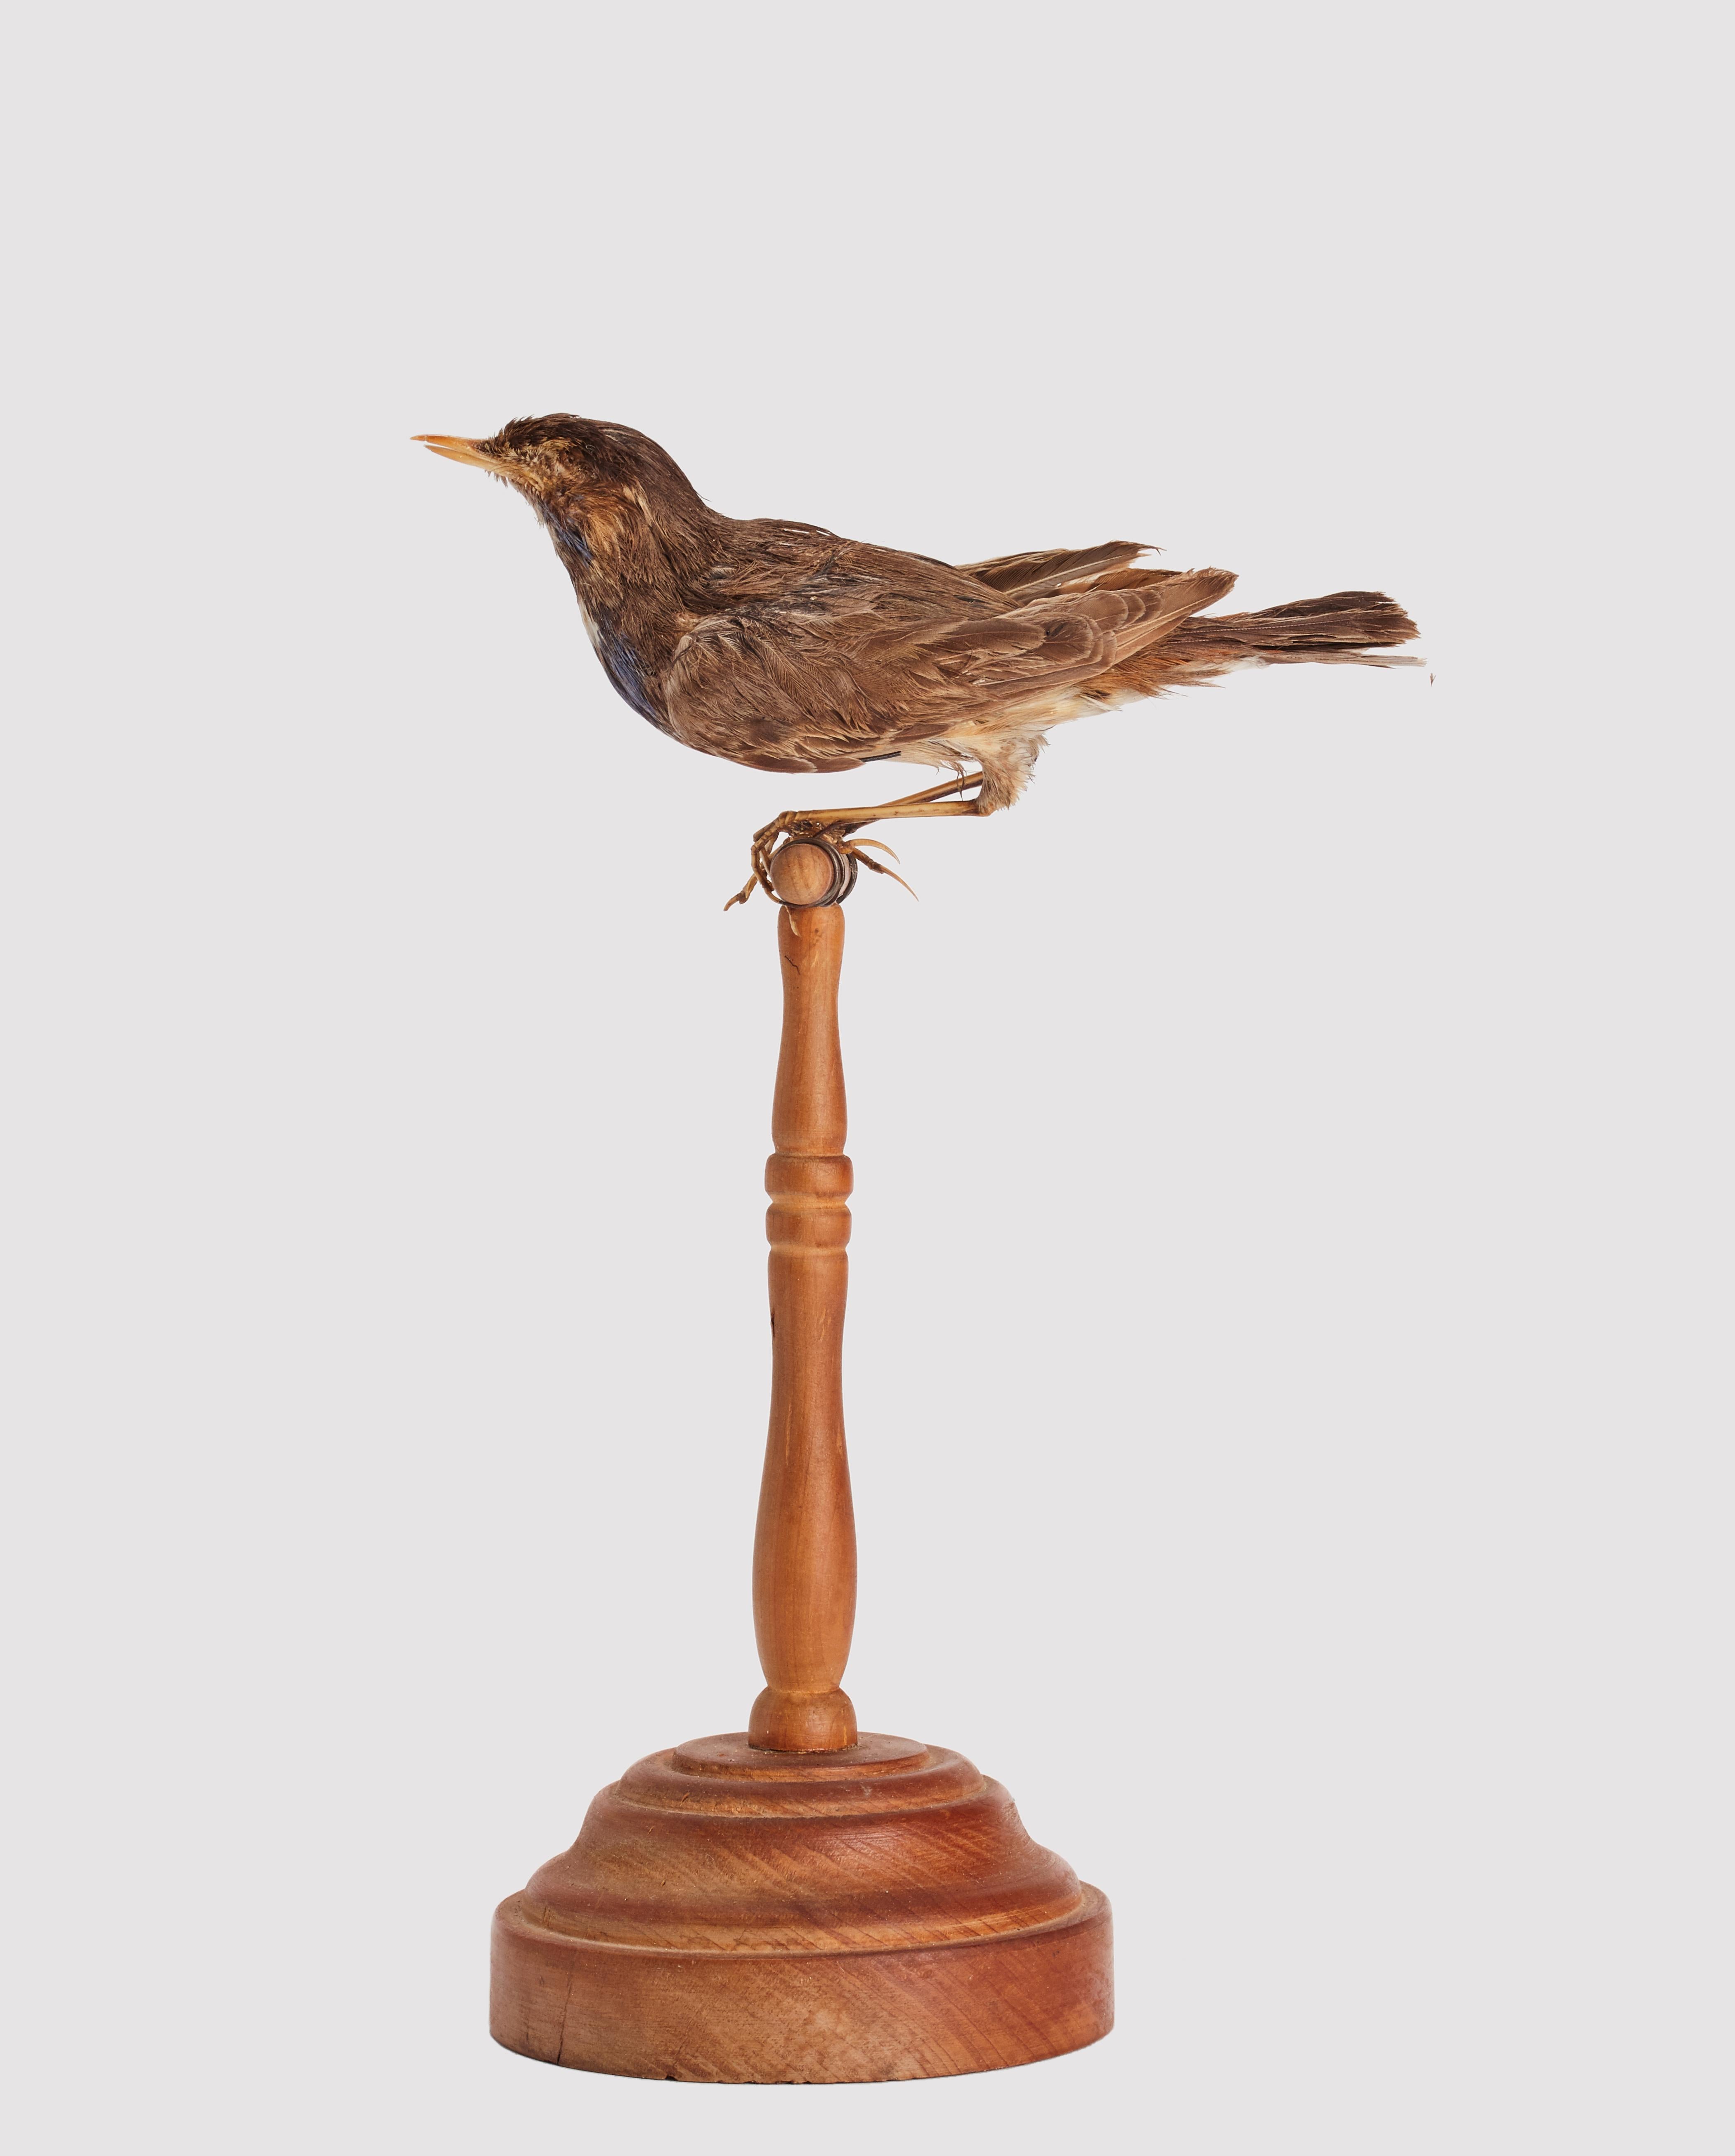 Natural specimen from Wunderkammer Stuffed bird thrush song (Turdus philomelos) mounted on a wooden base with cartouche Specimen for laboratory and Natural history cabinet. S. Brogi Naturalista. Siena, Italy circa 1880.